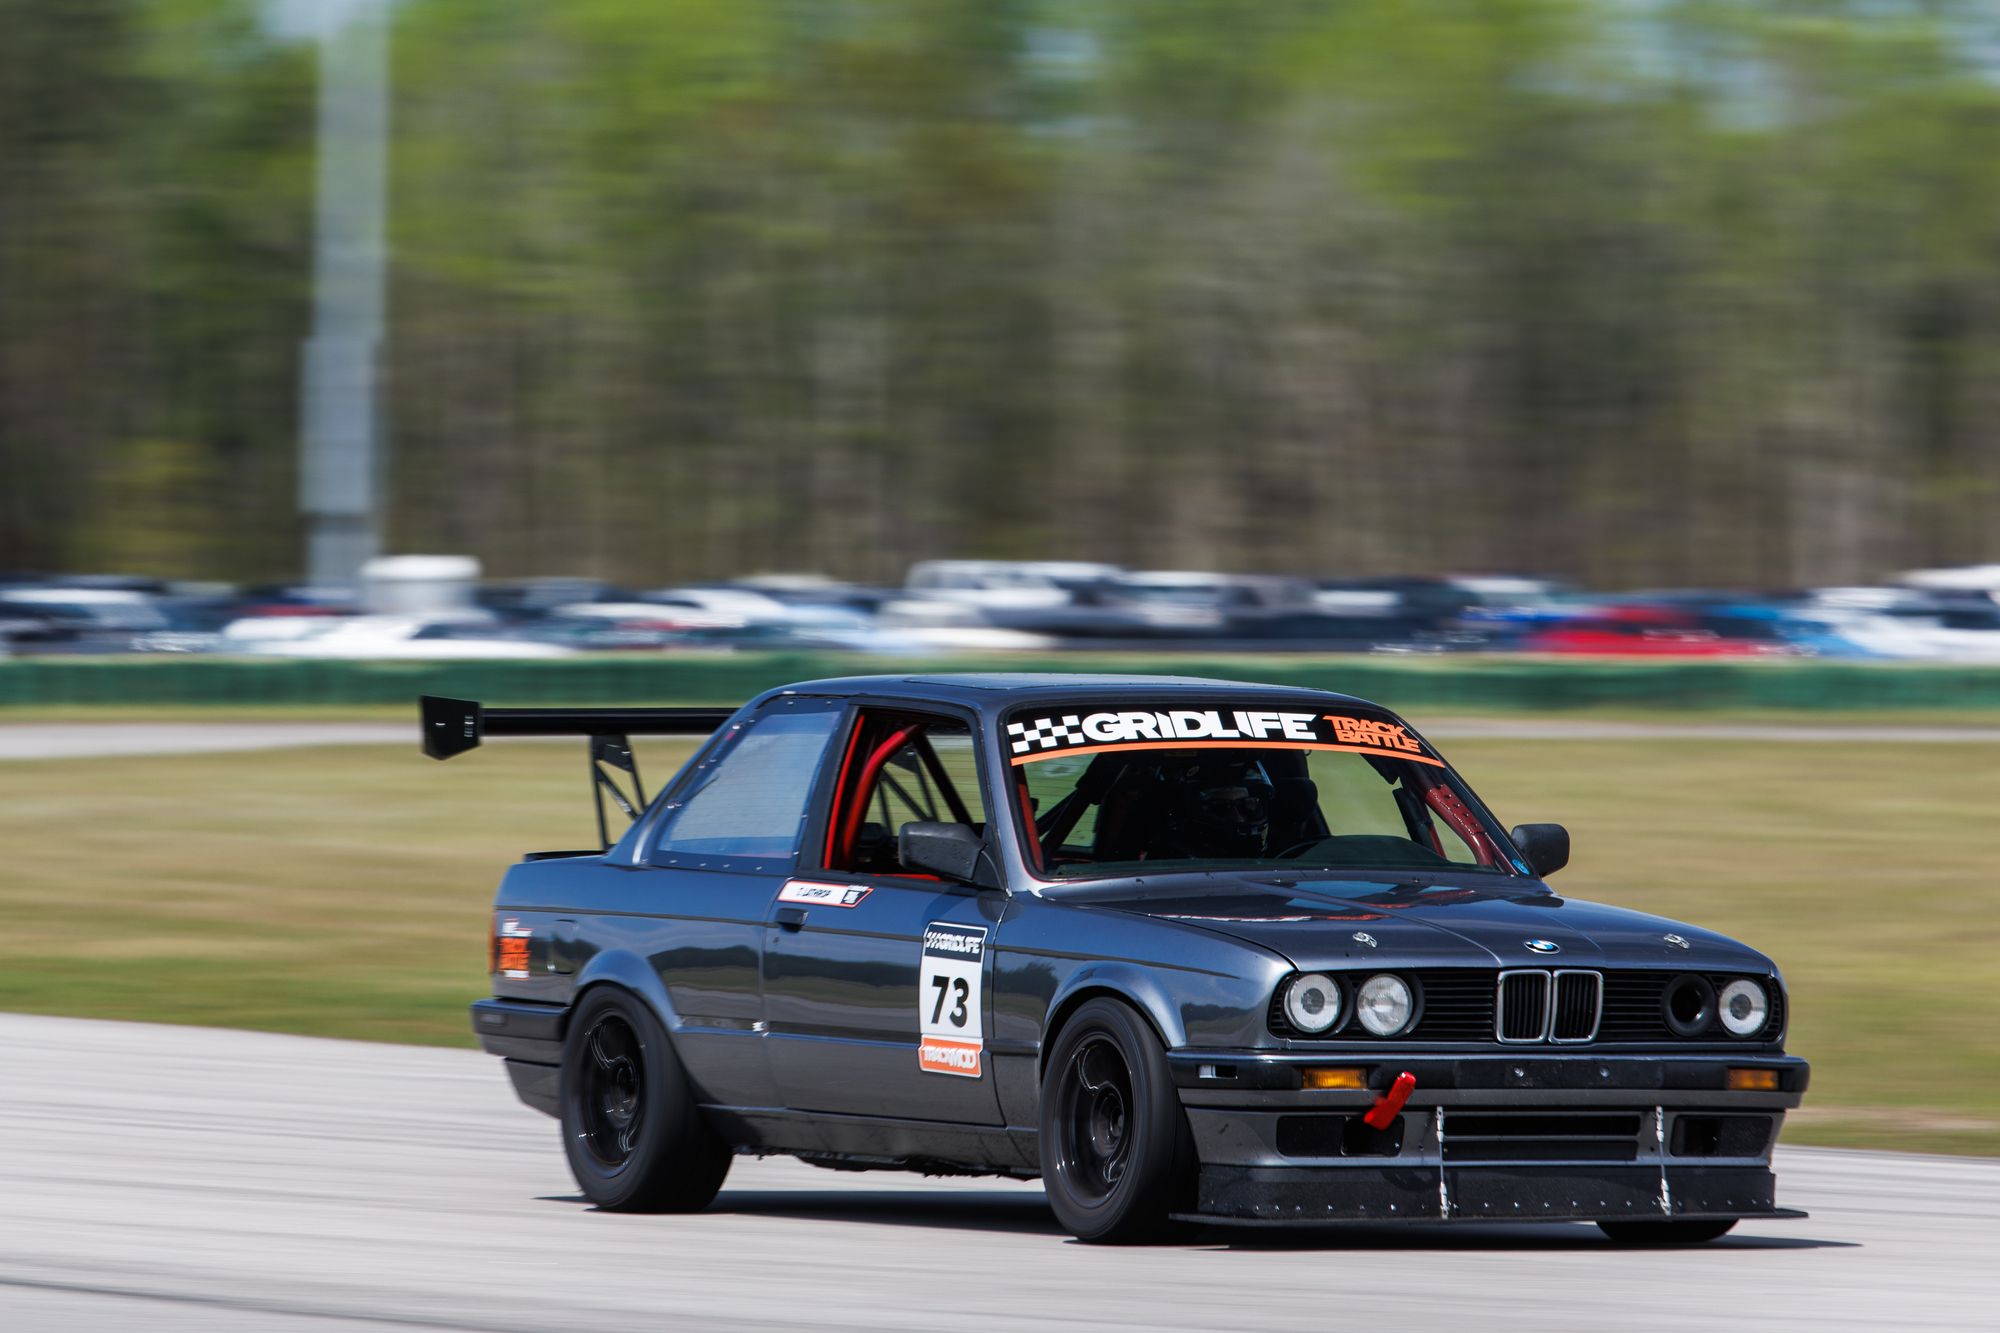 Why I Sold One of My E30s